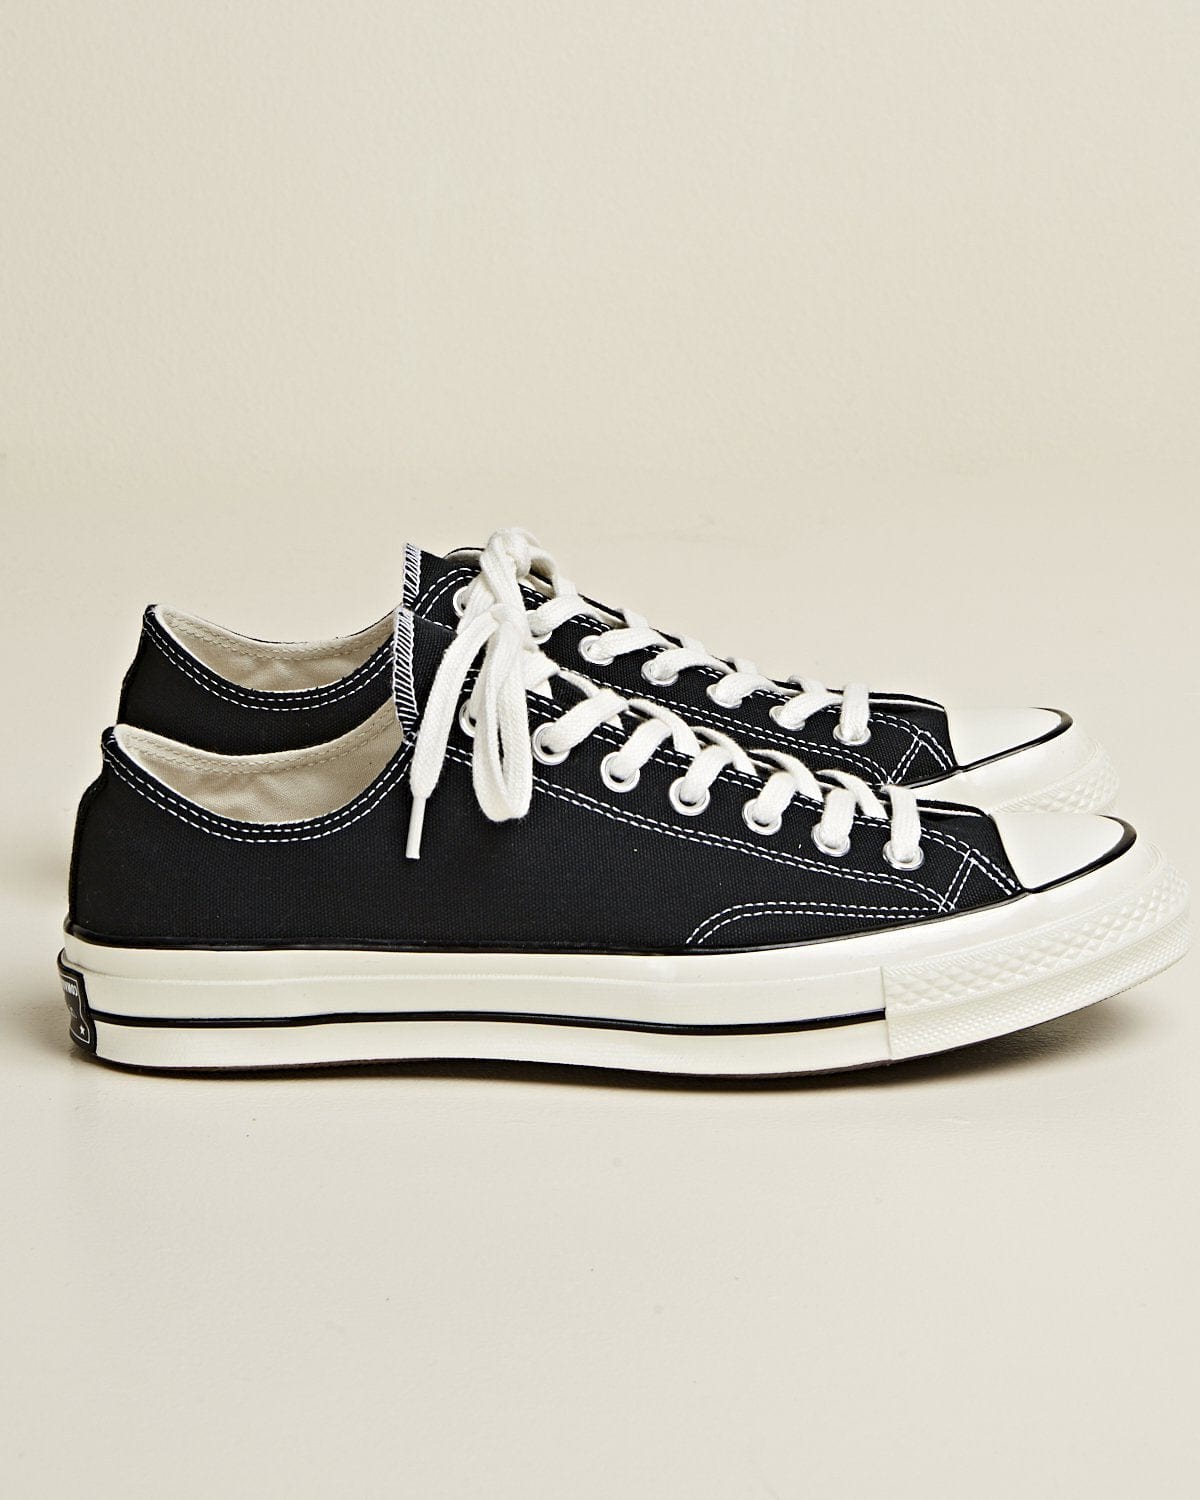 Converse Chuck 70 Ox Black Shoes Sneakers Unisex